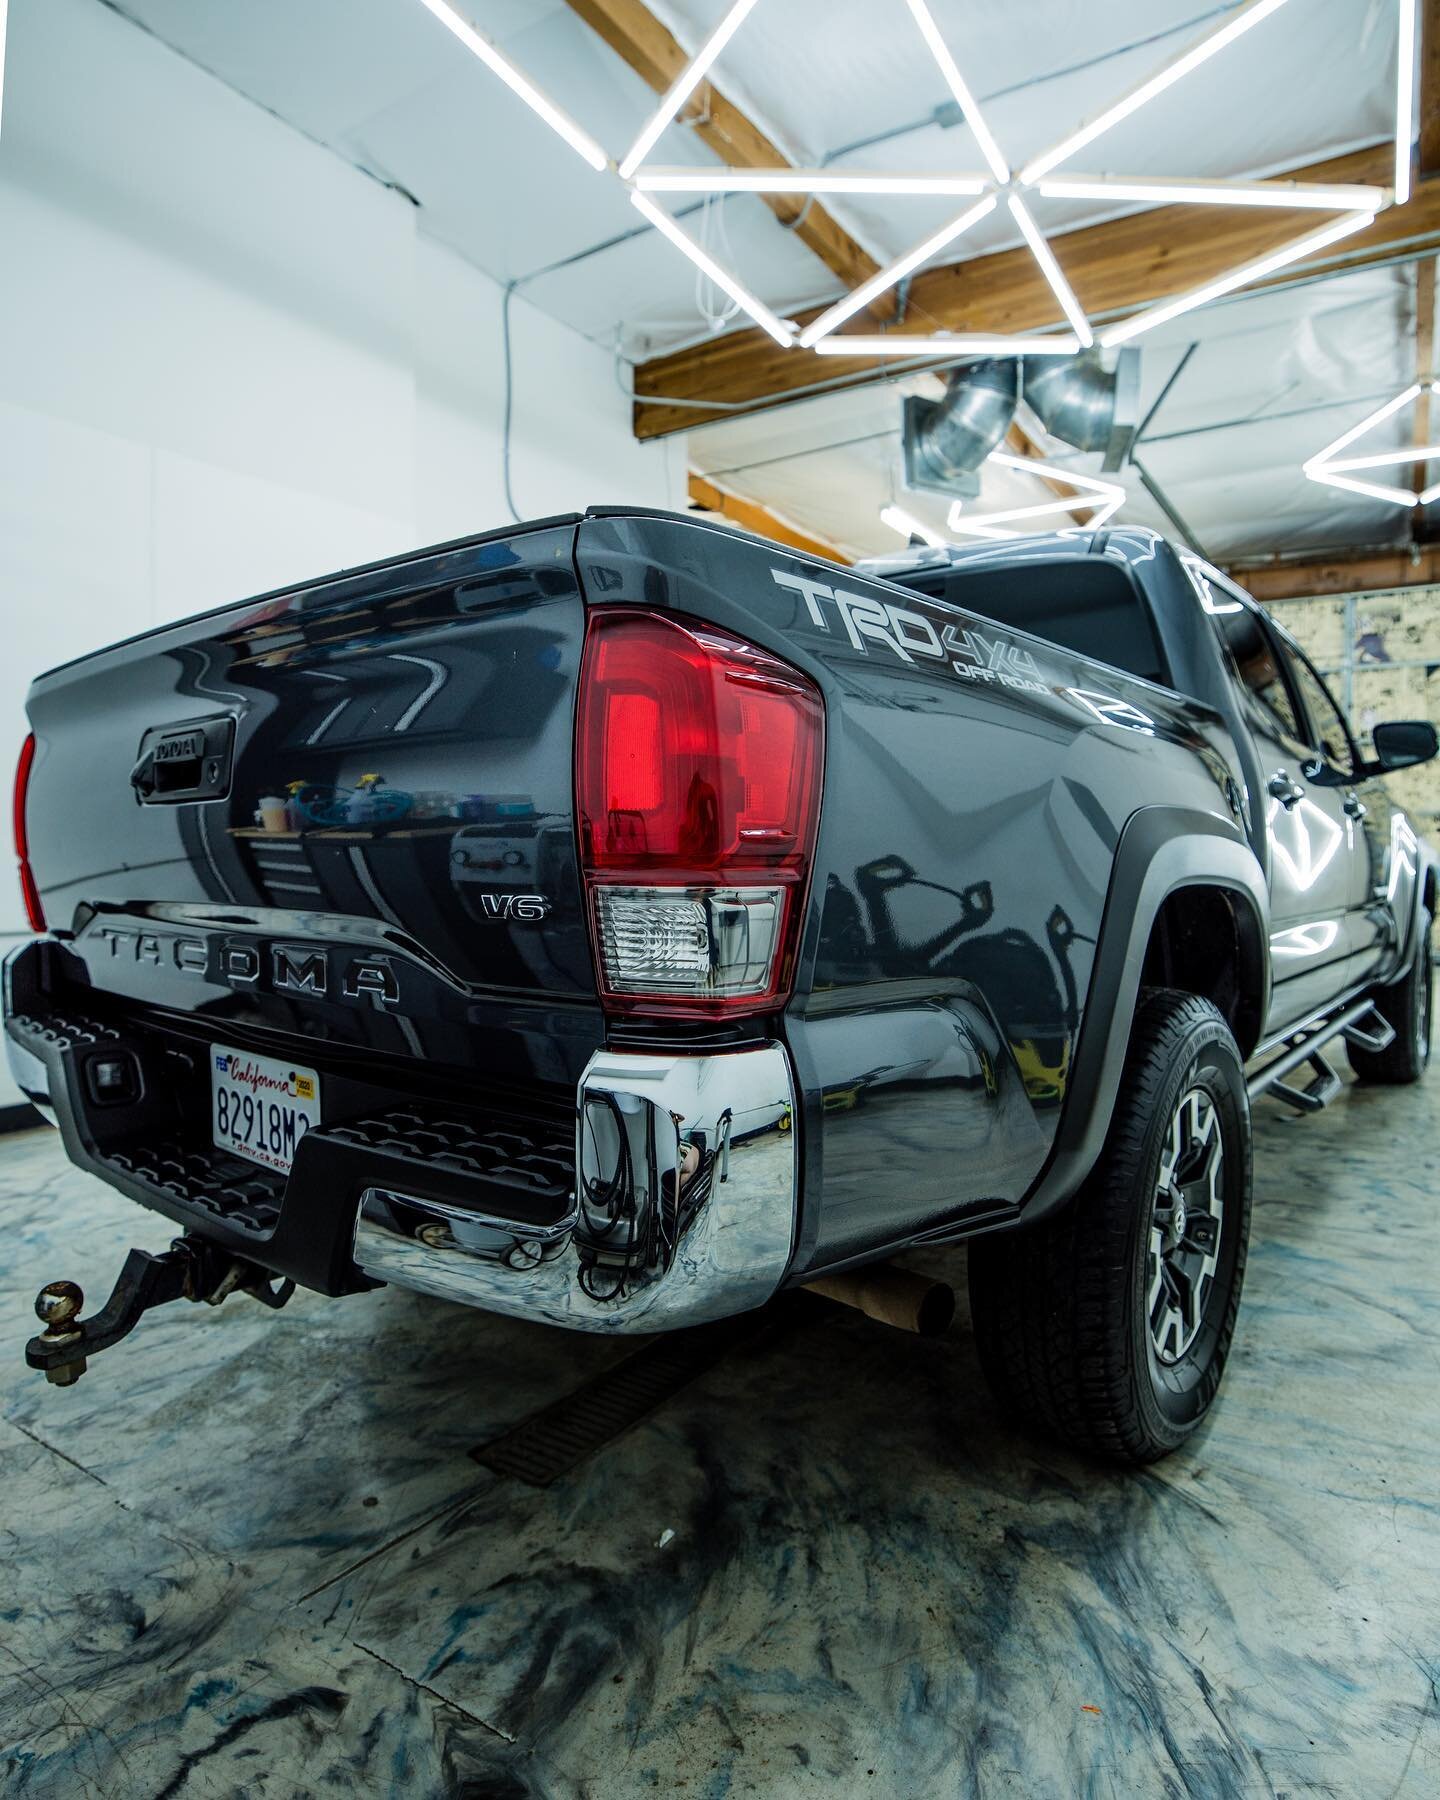 From the city streets to off-road adventures, the Toyota Tacoma is ready for anything. 

We are an auto detailing team servicing Sacramento since 2019

Contact us today for more information
📲916-287-3870